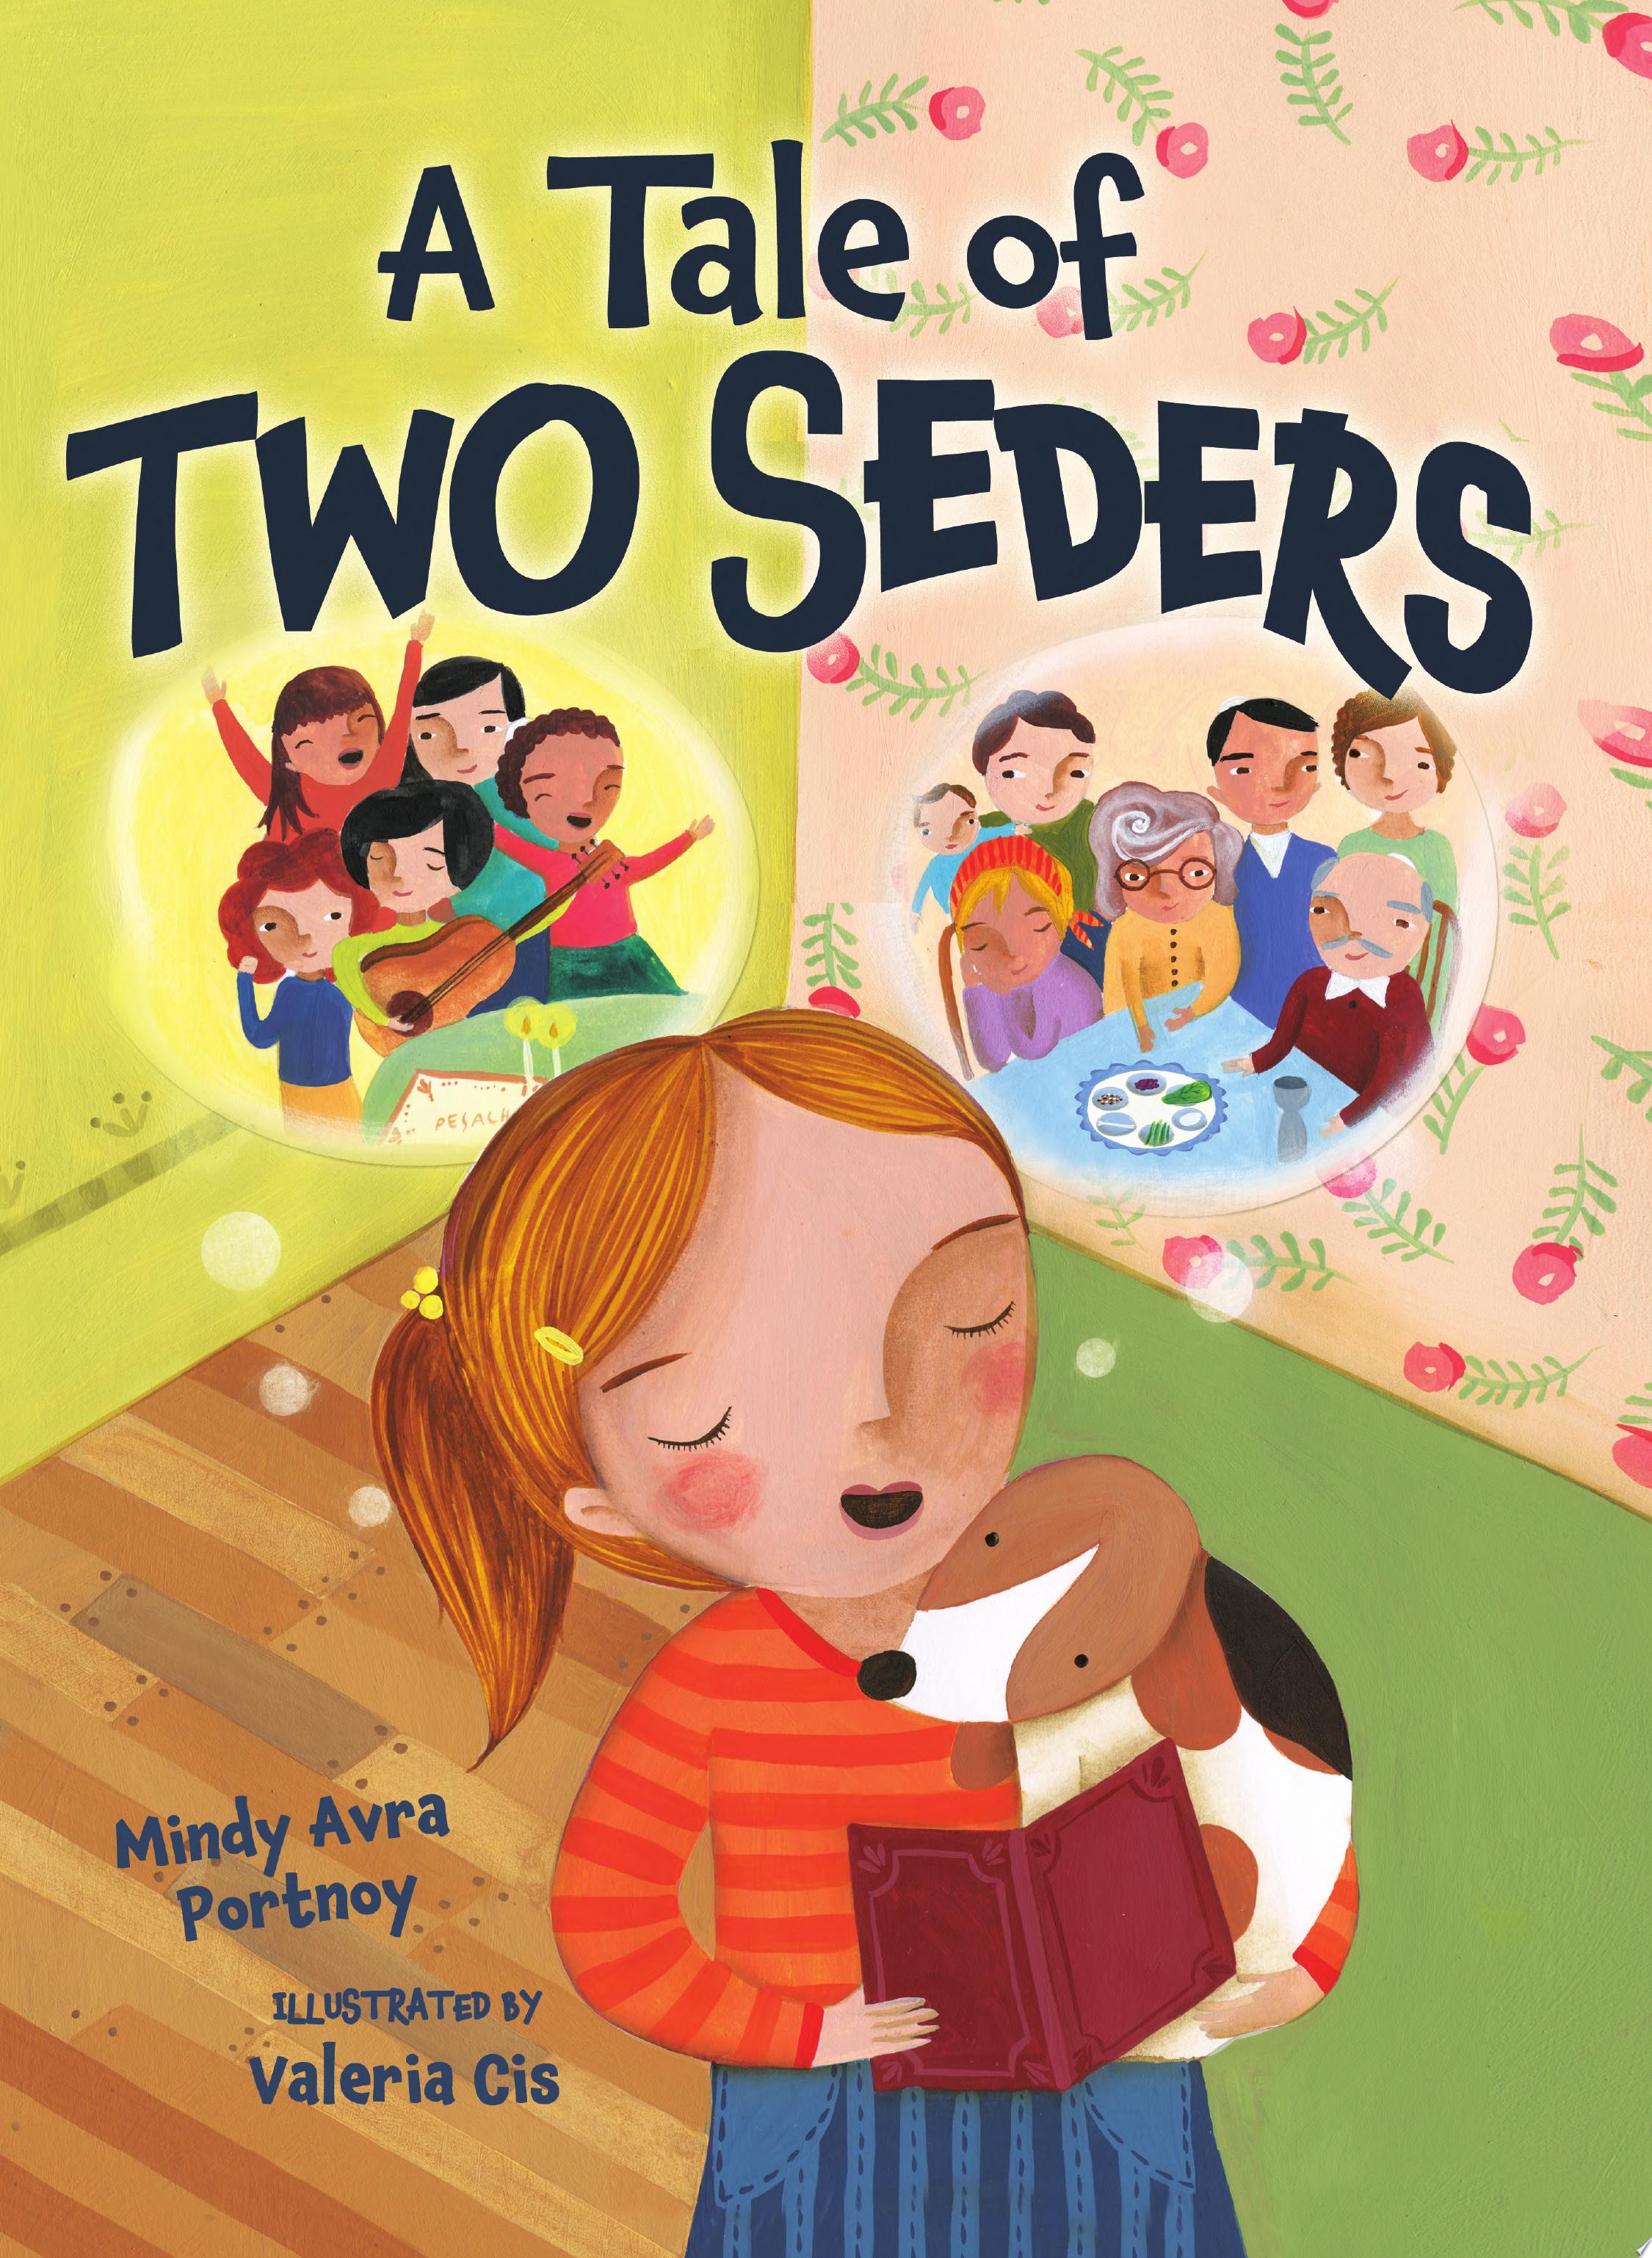 Image for "A Tale of Two Seders"